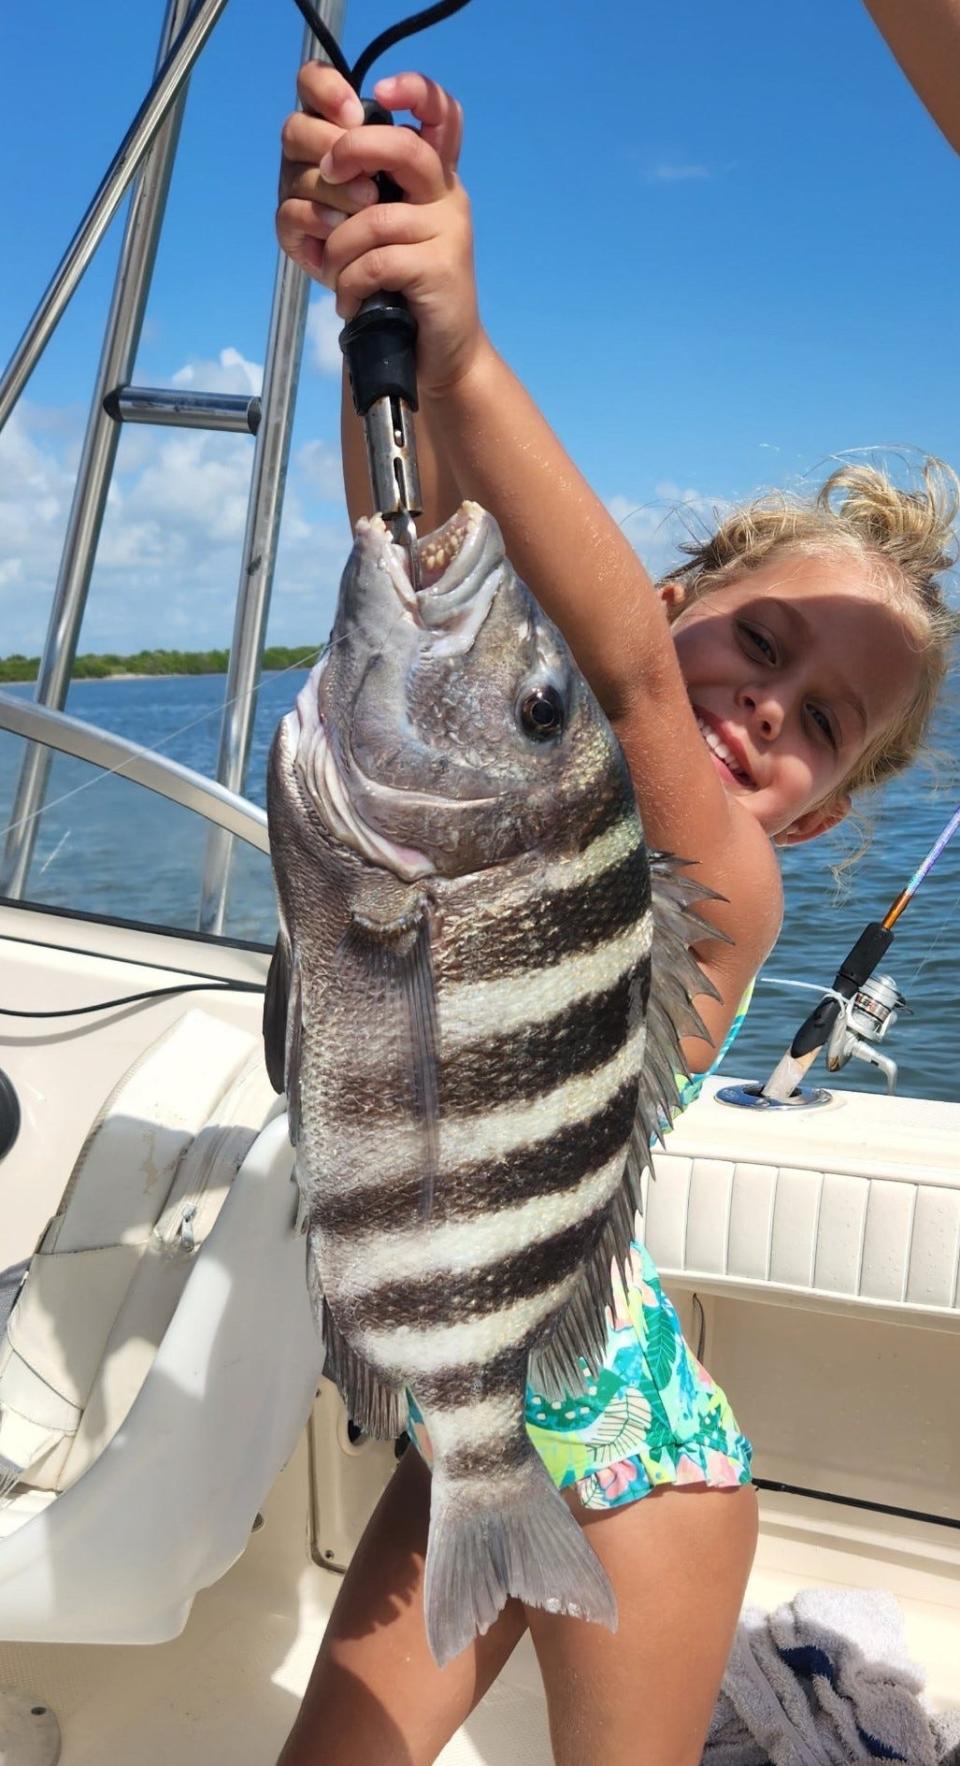 Maylee Butler, 8 years old, gives it all she's got to hold up this chunky sheepshead caught in the intracoastal.